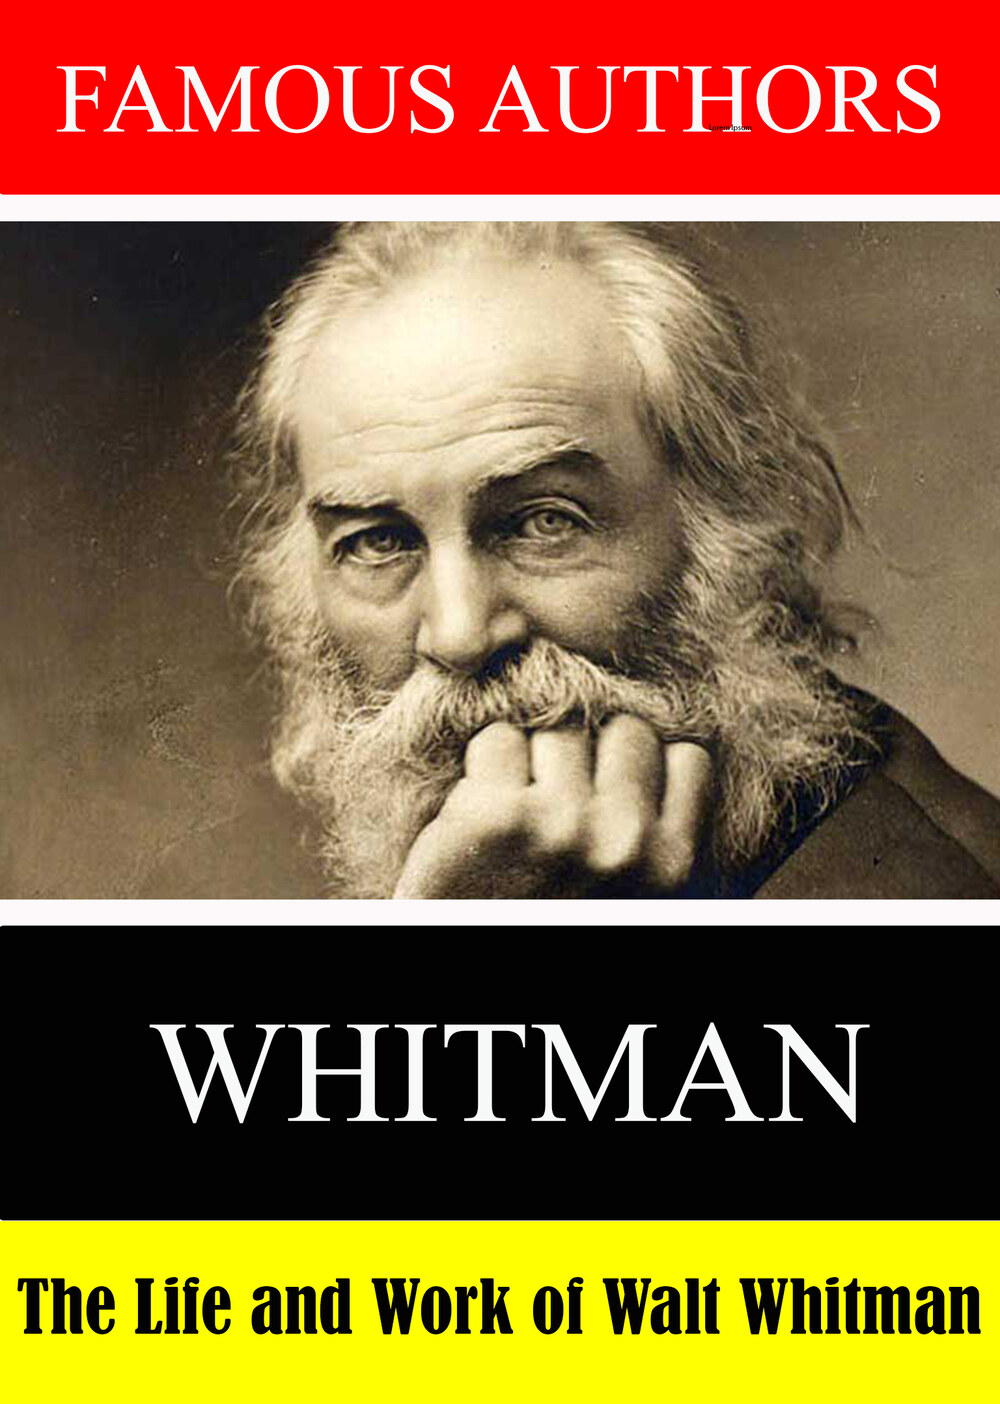 L7911 - Famous Authors:  The Life and Work of Walt Whitman